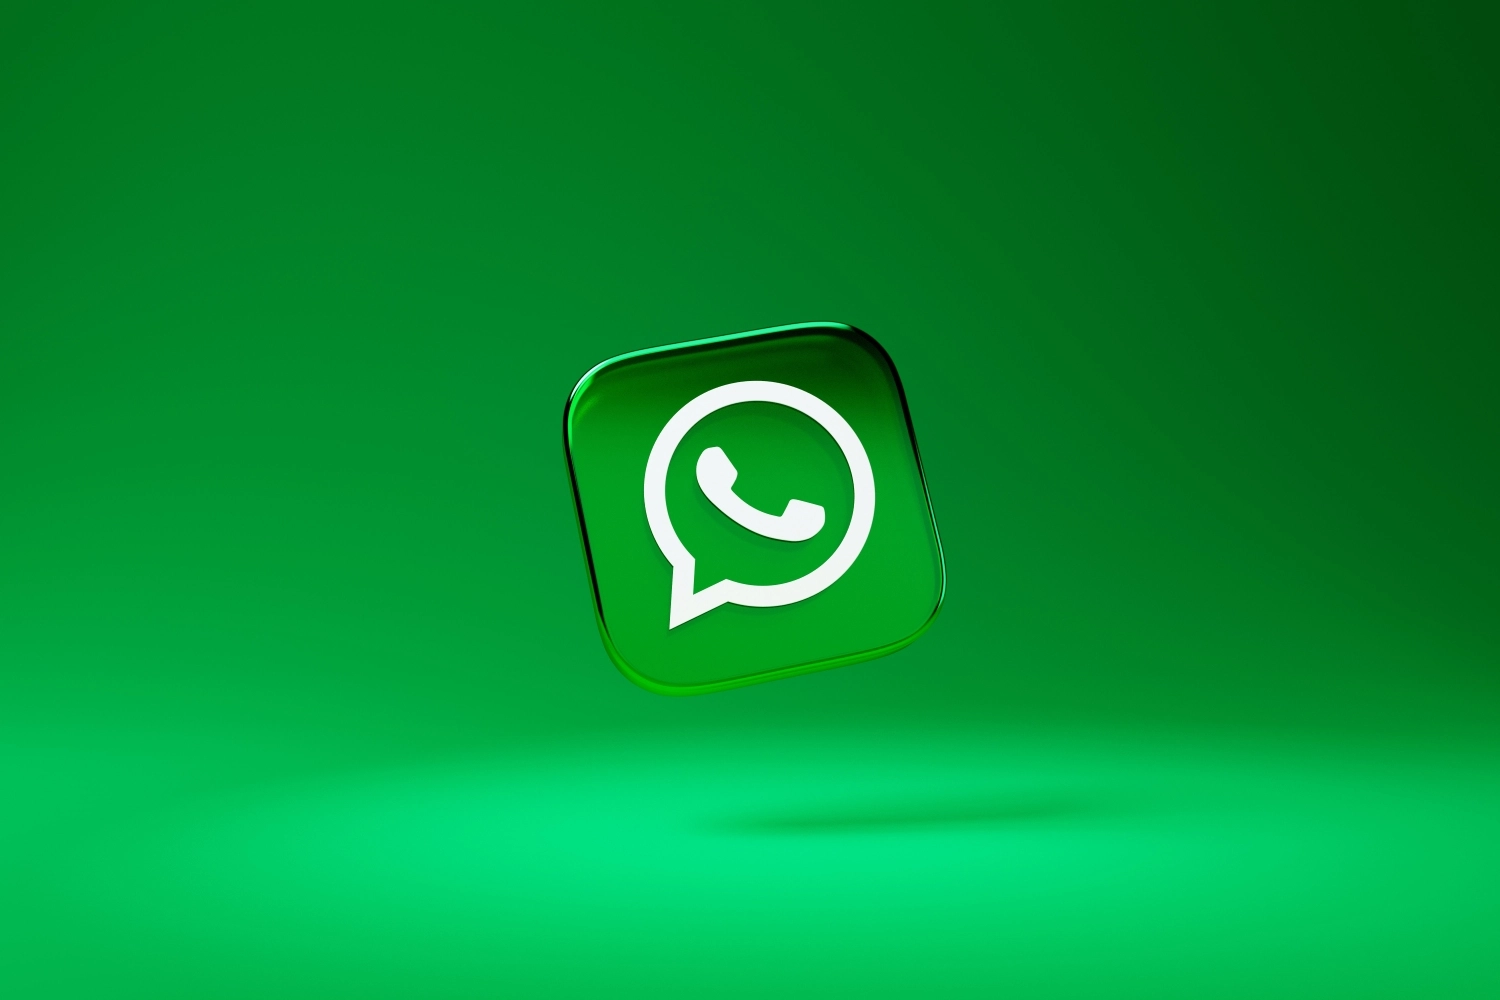 New privacy features for Whatsapp